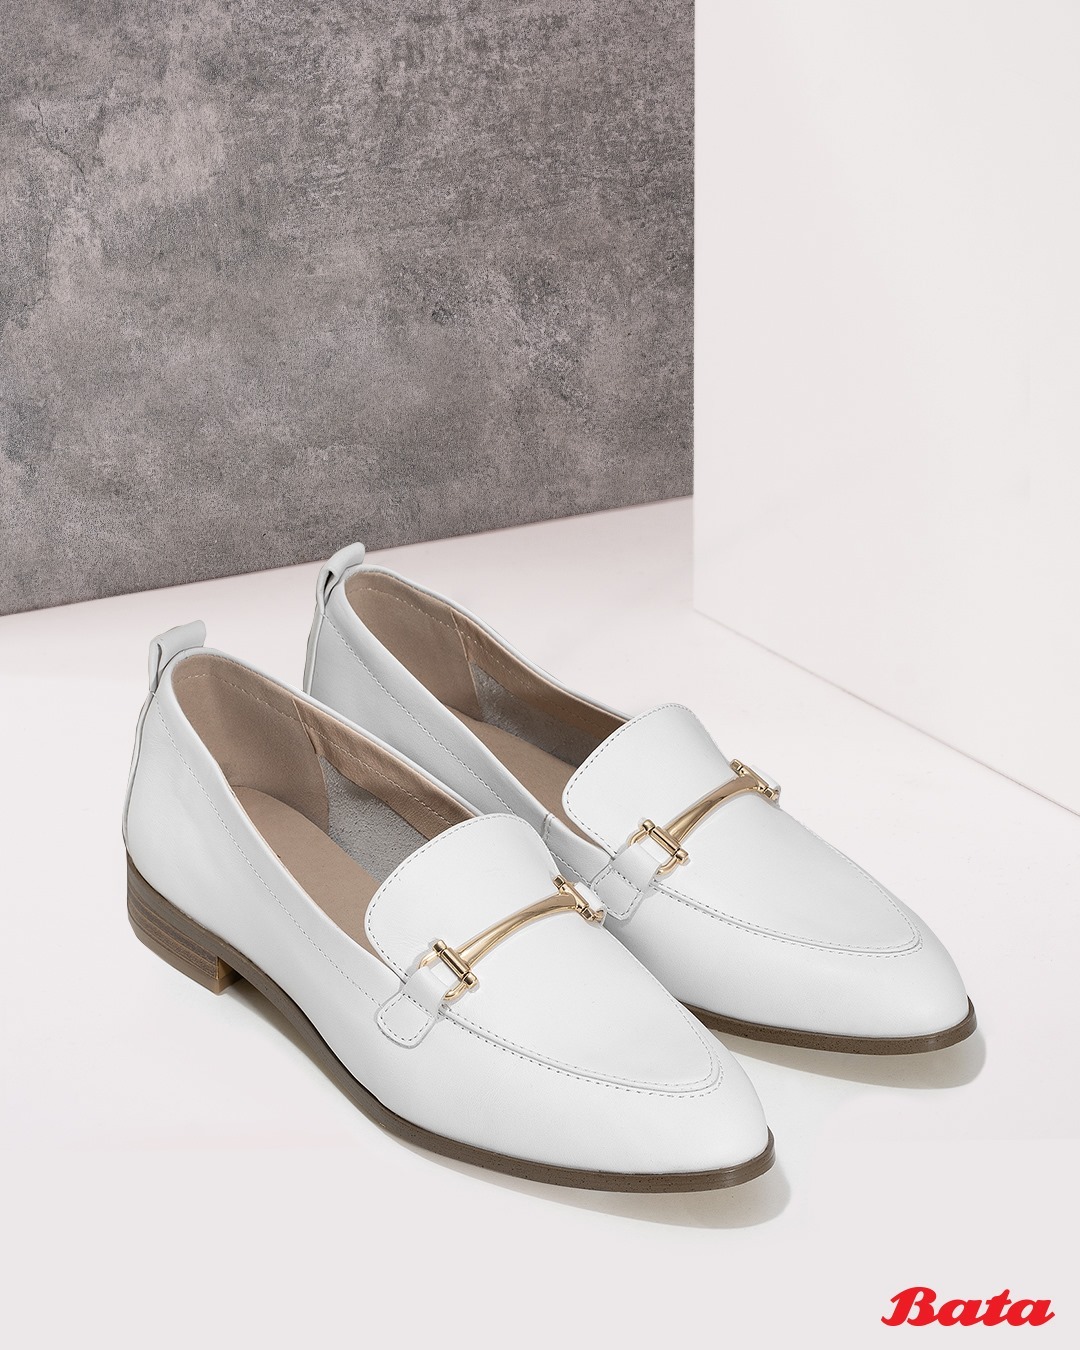 Bata Brands - Clean, bright, white loafers will class up any outfit, especially if it’s made up of beige and nude tones. 
.
.
.
.
.

#BataShoes #Loafers #Detail #ShoesAddict #Stylish #Shoes #ShoesLove...